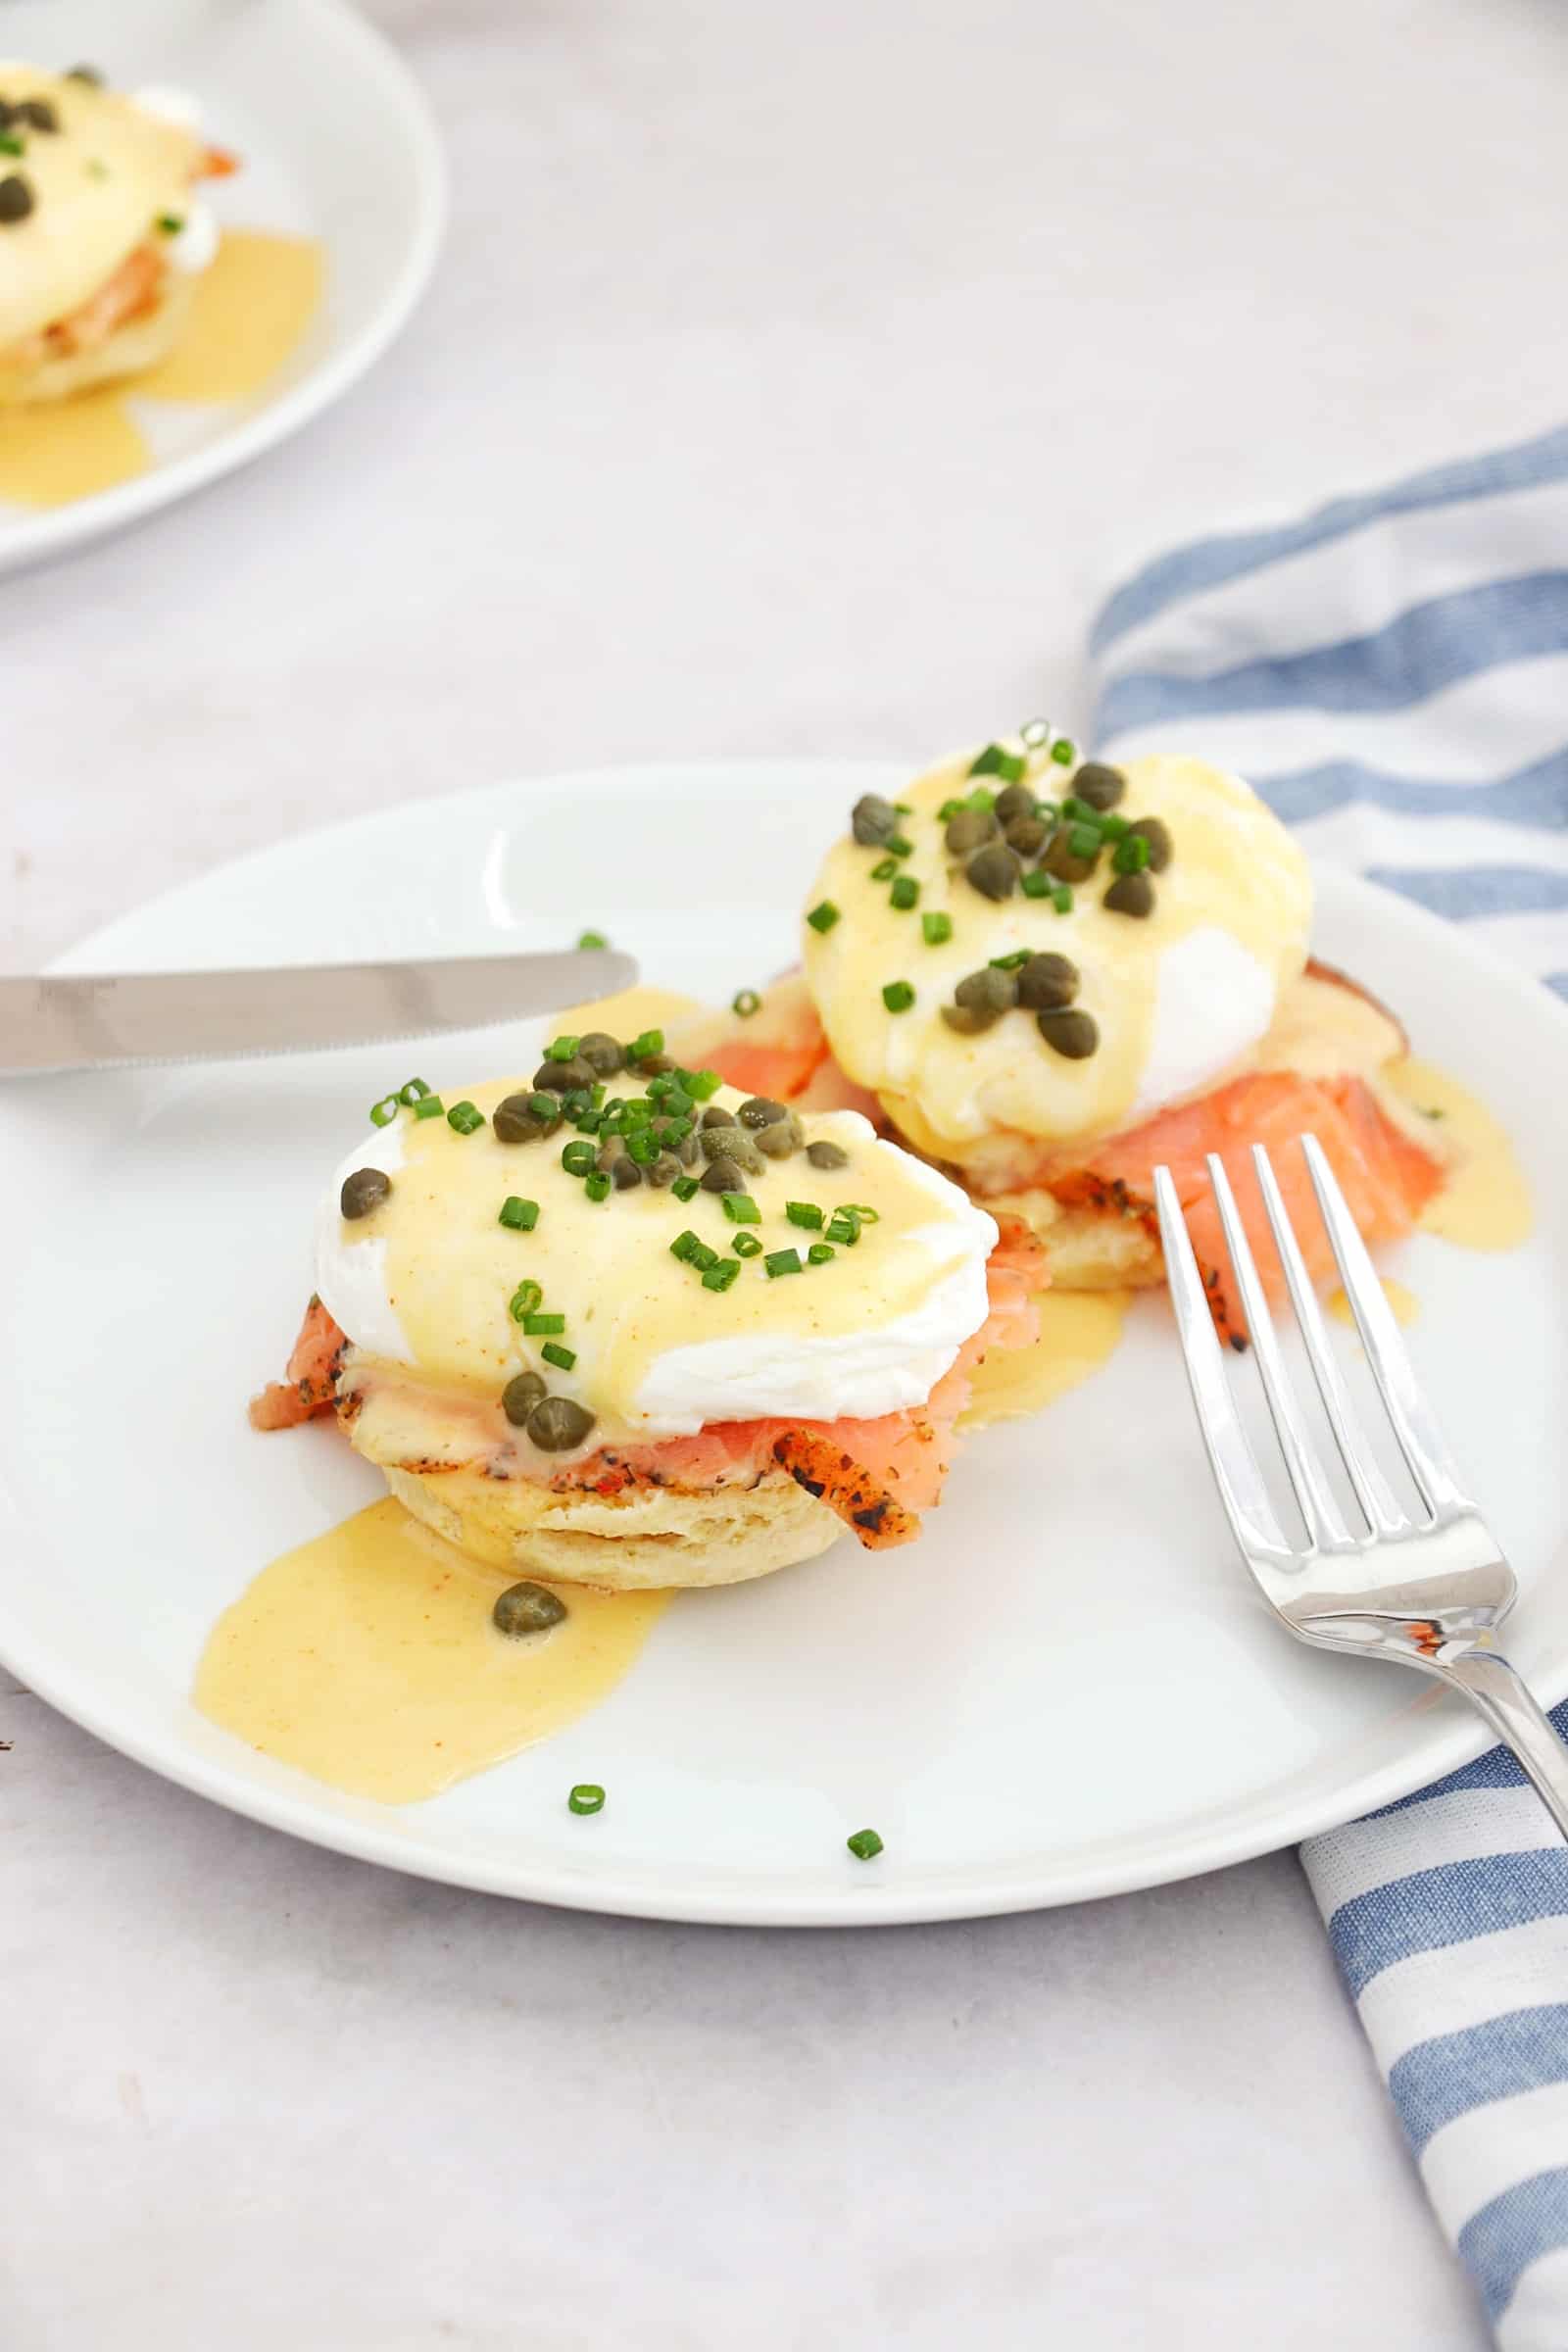 lox benedict on a plate.